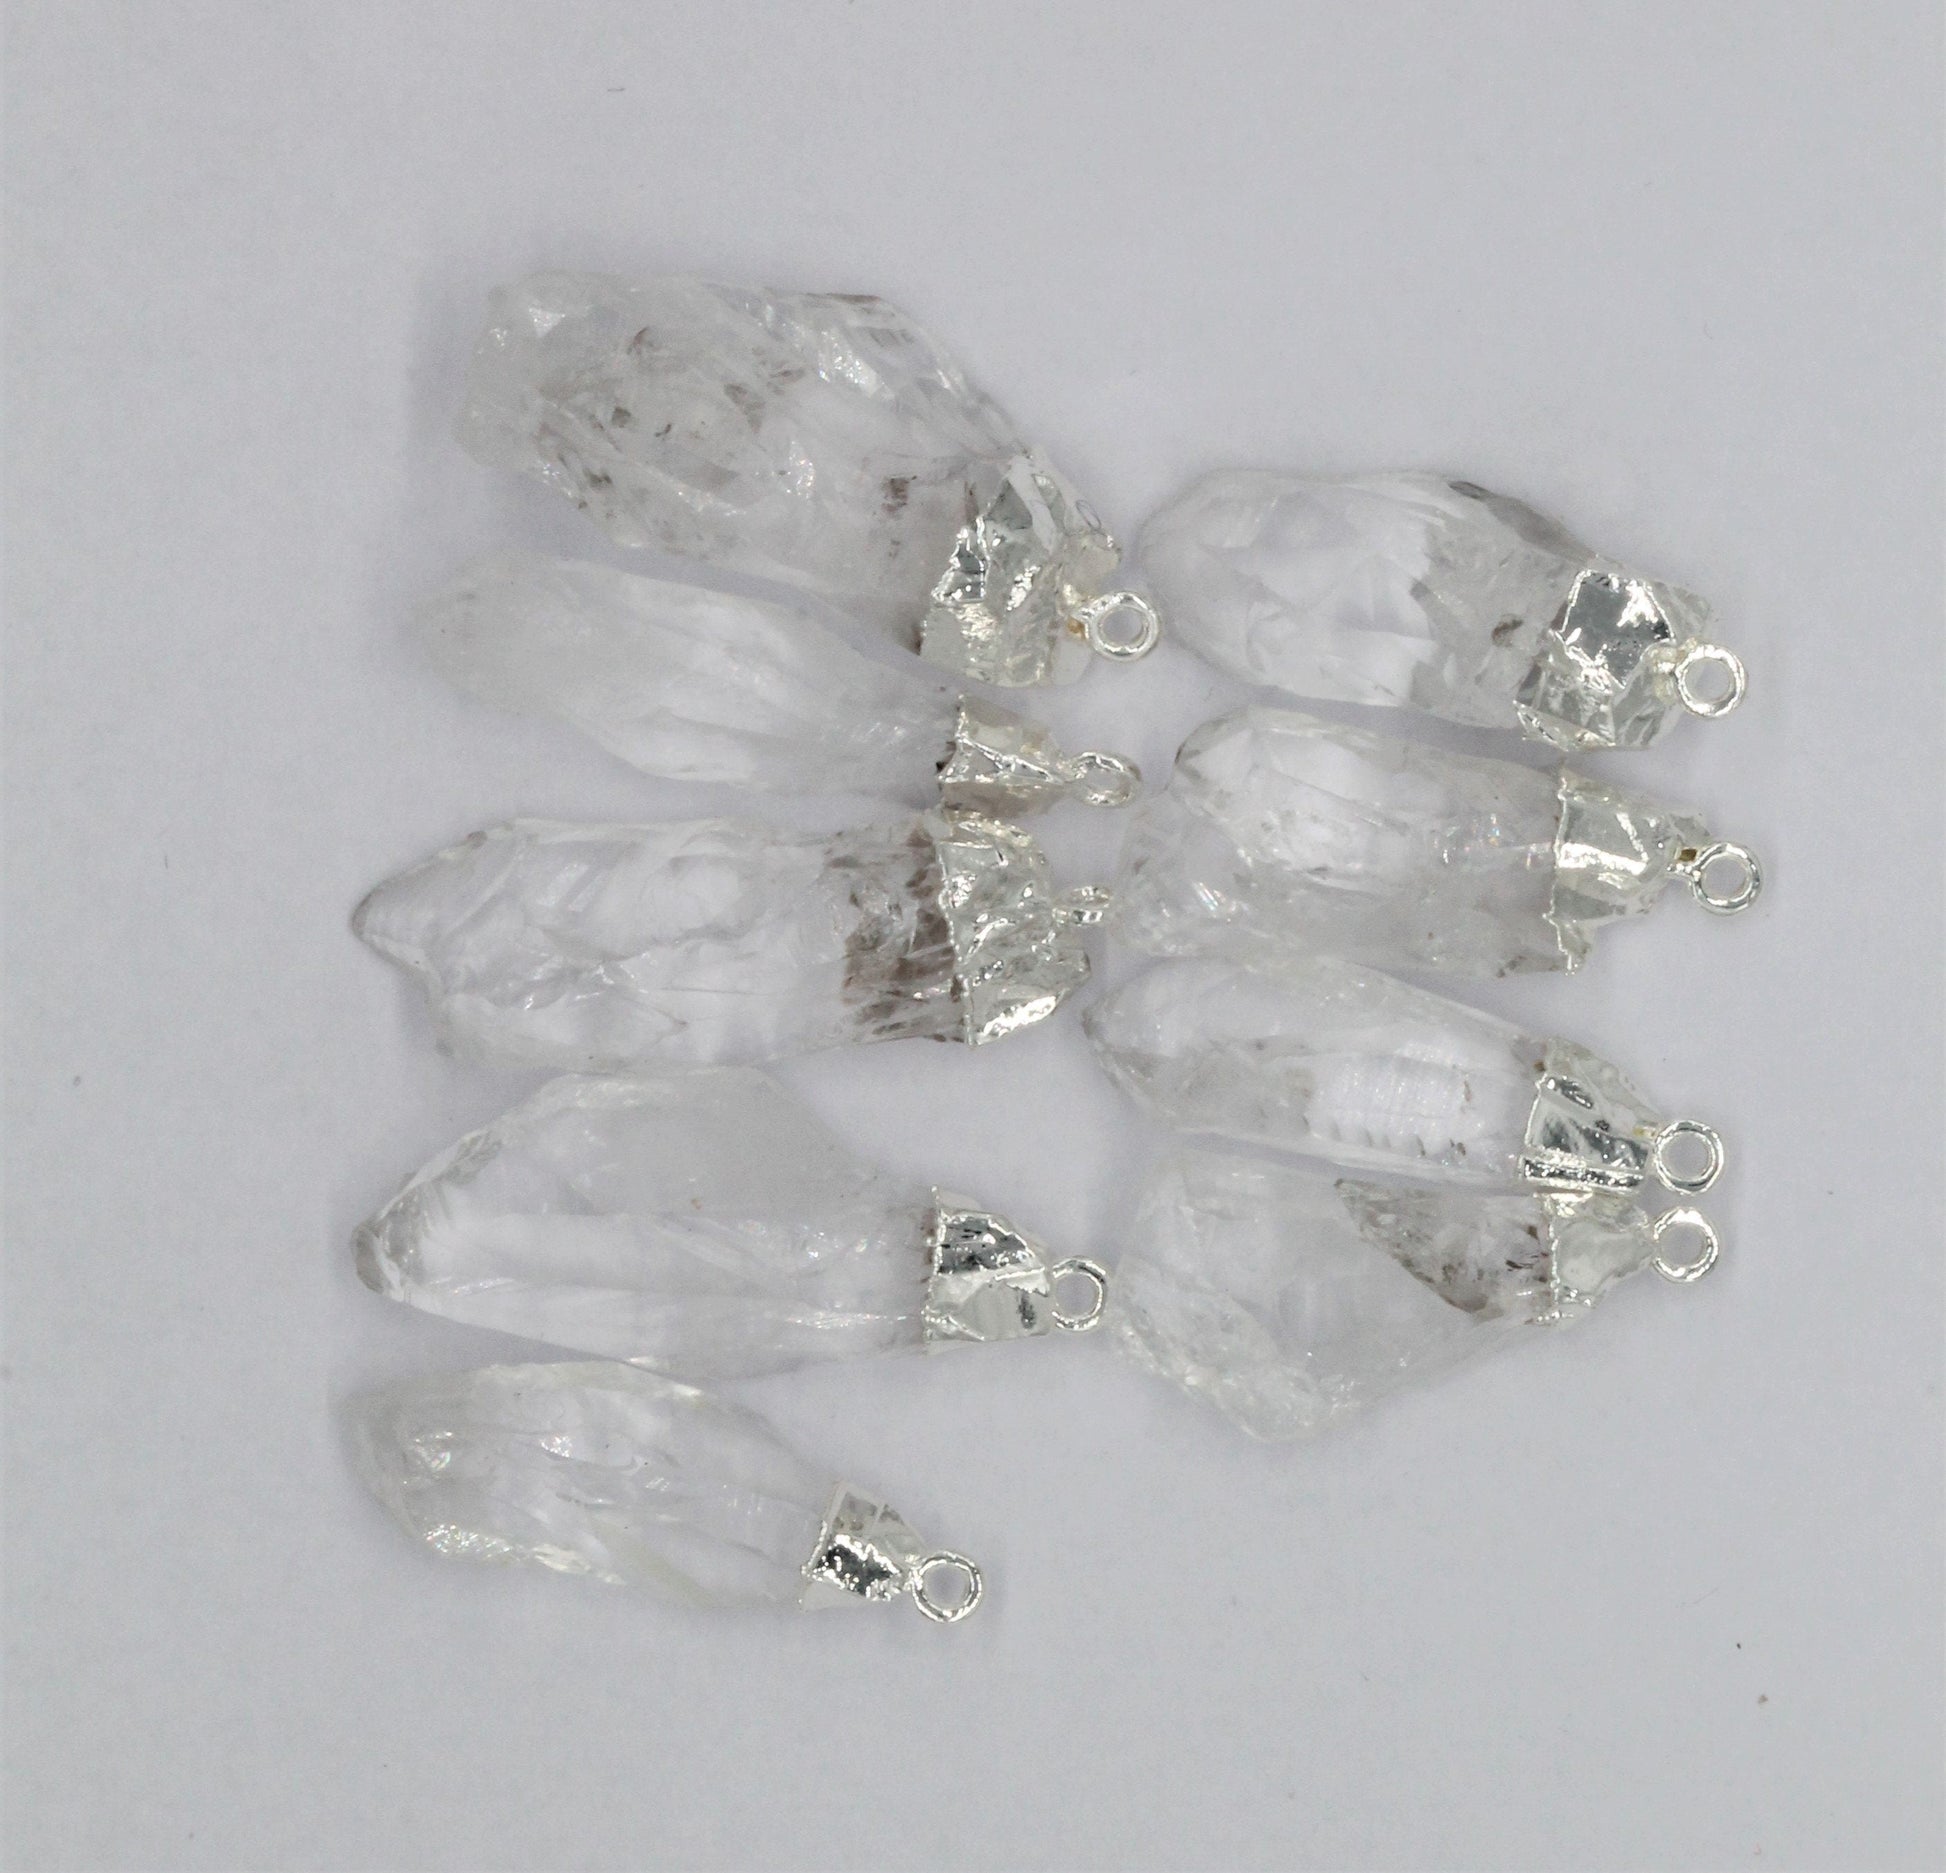 Gold Edged Rock Crystal Quartz Point charms Rough Clear Spike Points 15 - 45 mm long - Meena Design